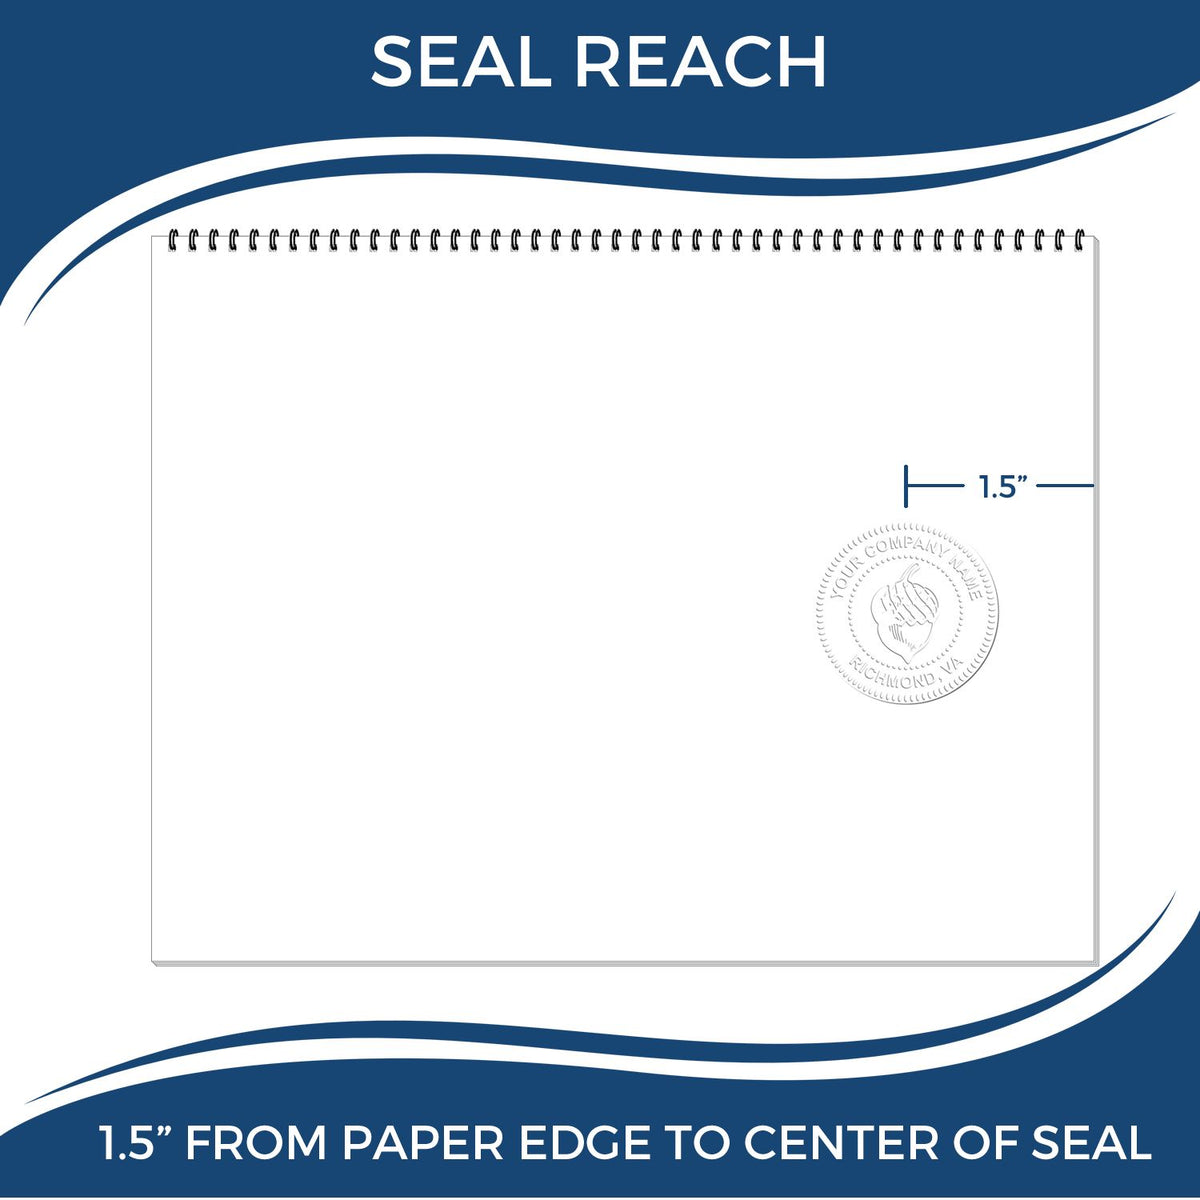 An infographic showing the seal reach which is represented by a ruler and a miniature seal image of the Florida Desk Architect Embossing Seal